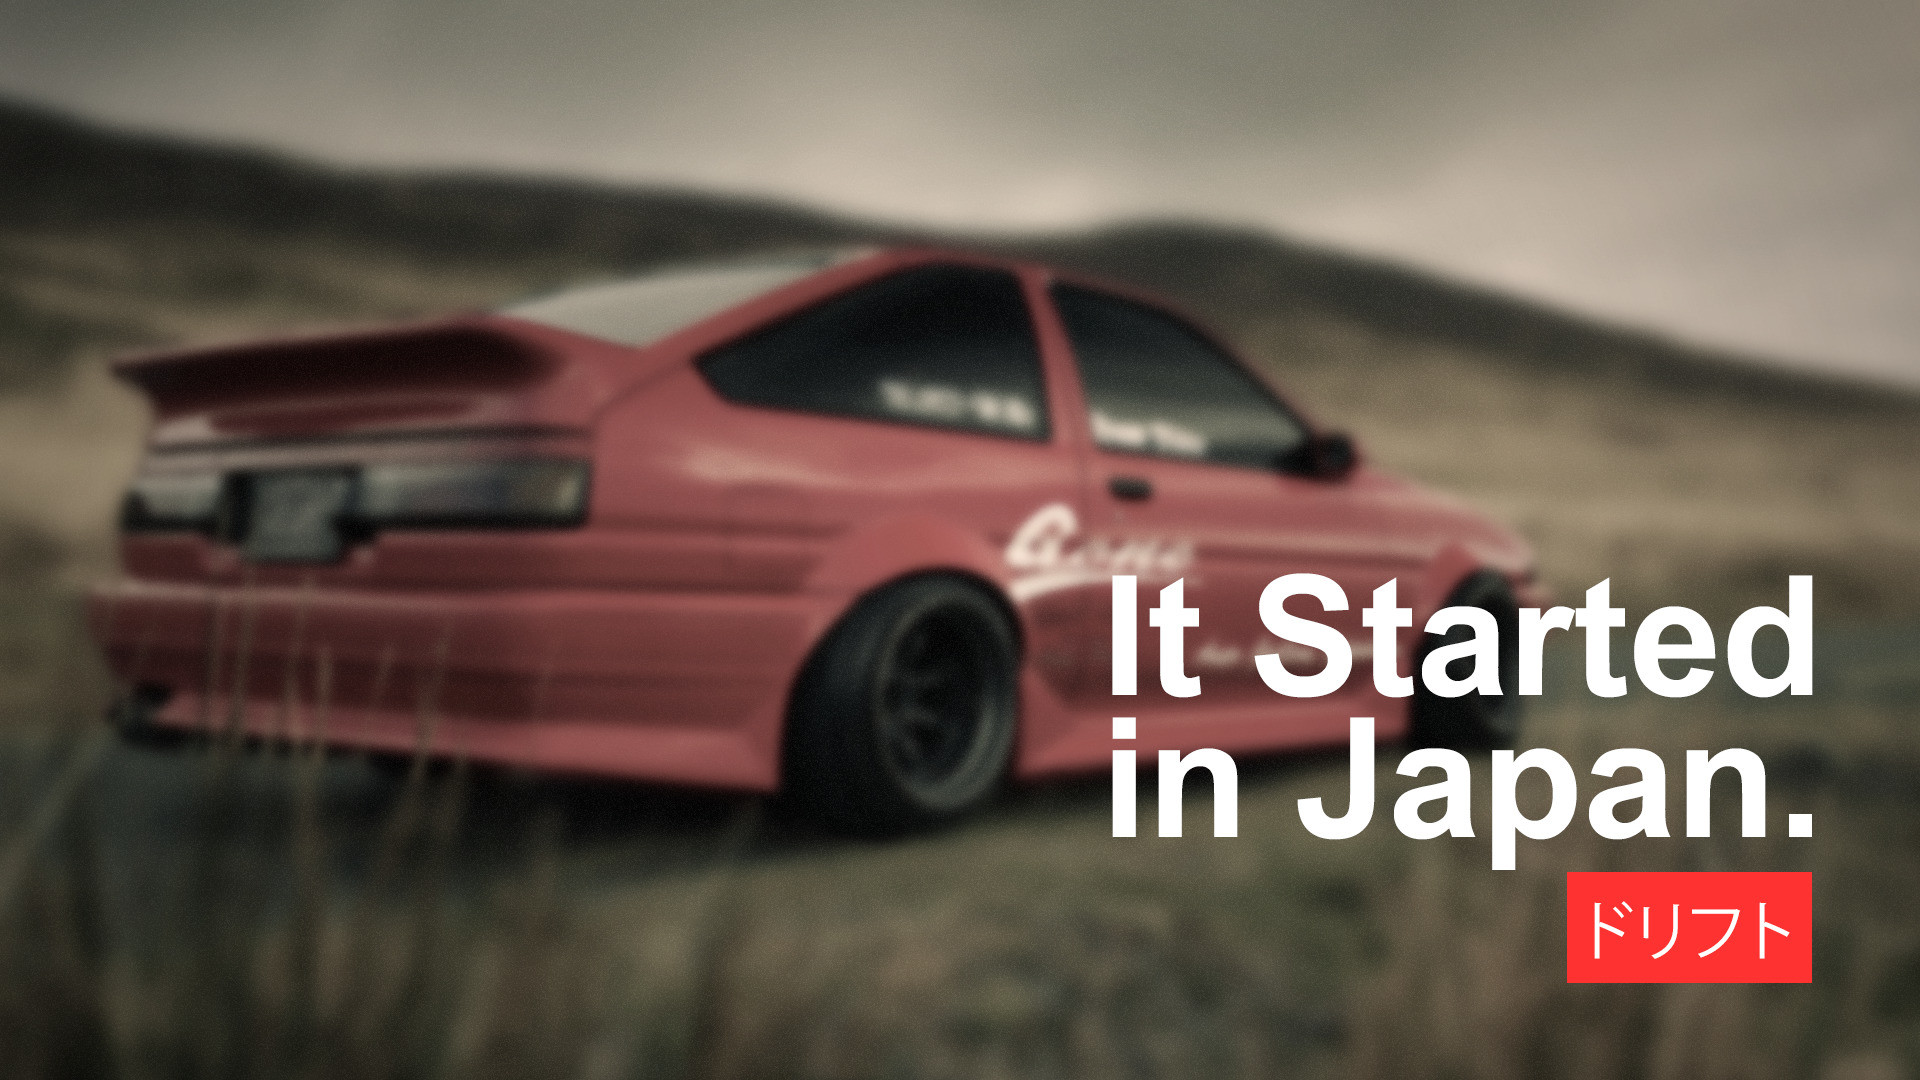 1920x1080 car, Japan, Drift, Drifting, Racing, Vehicle, Japanese Cars, Import,  Tuning, Modified, Toyota, AE86, Toyota AE86, Initial D, It Started In Japan  Wallpapers ...